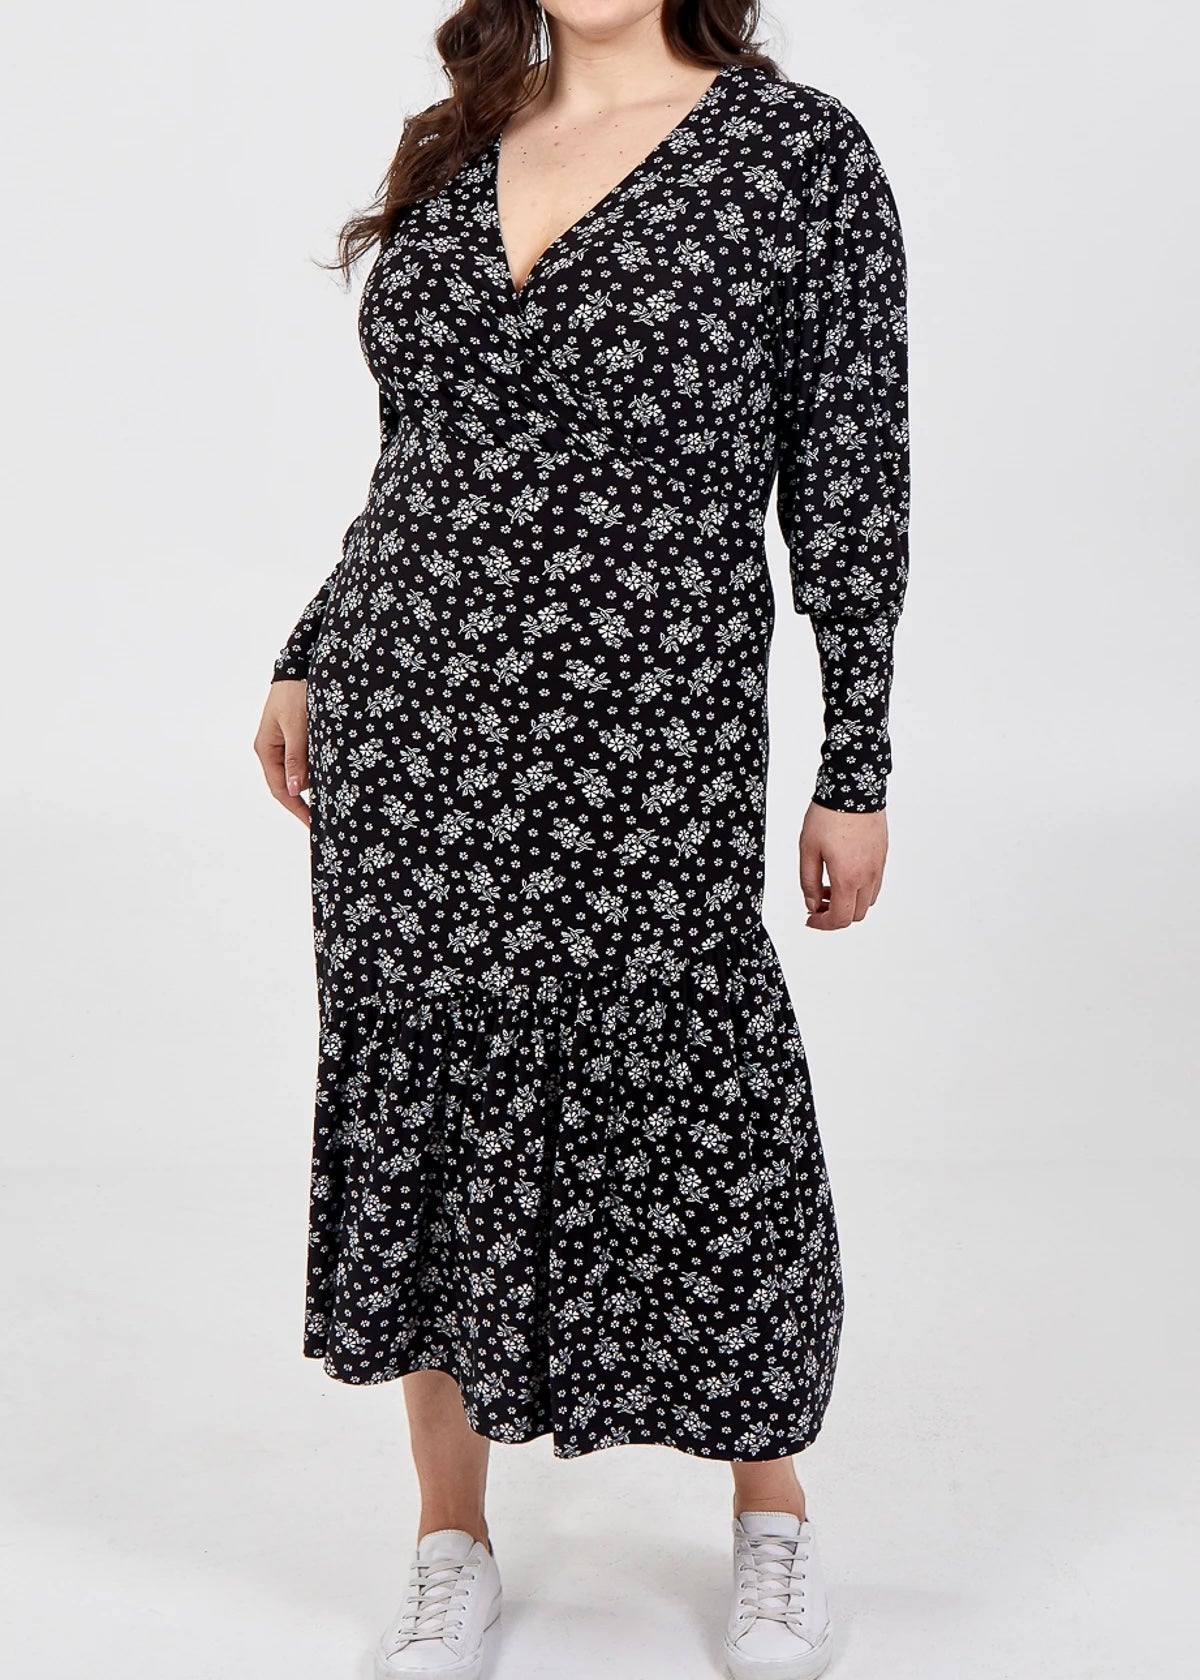 Sands smock midi dress in black with floral print and wrap style neckline 